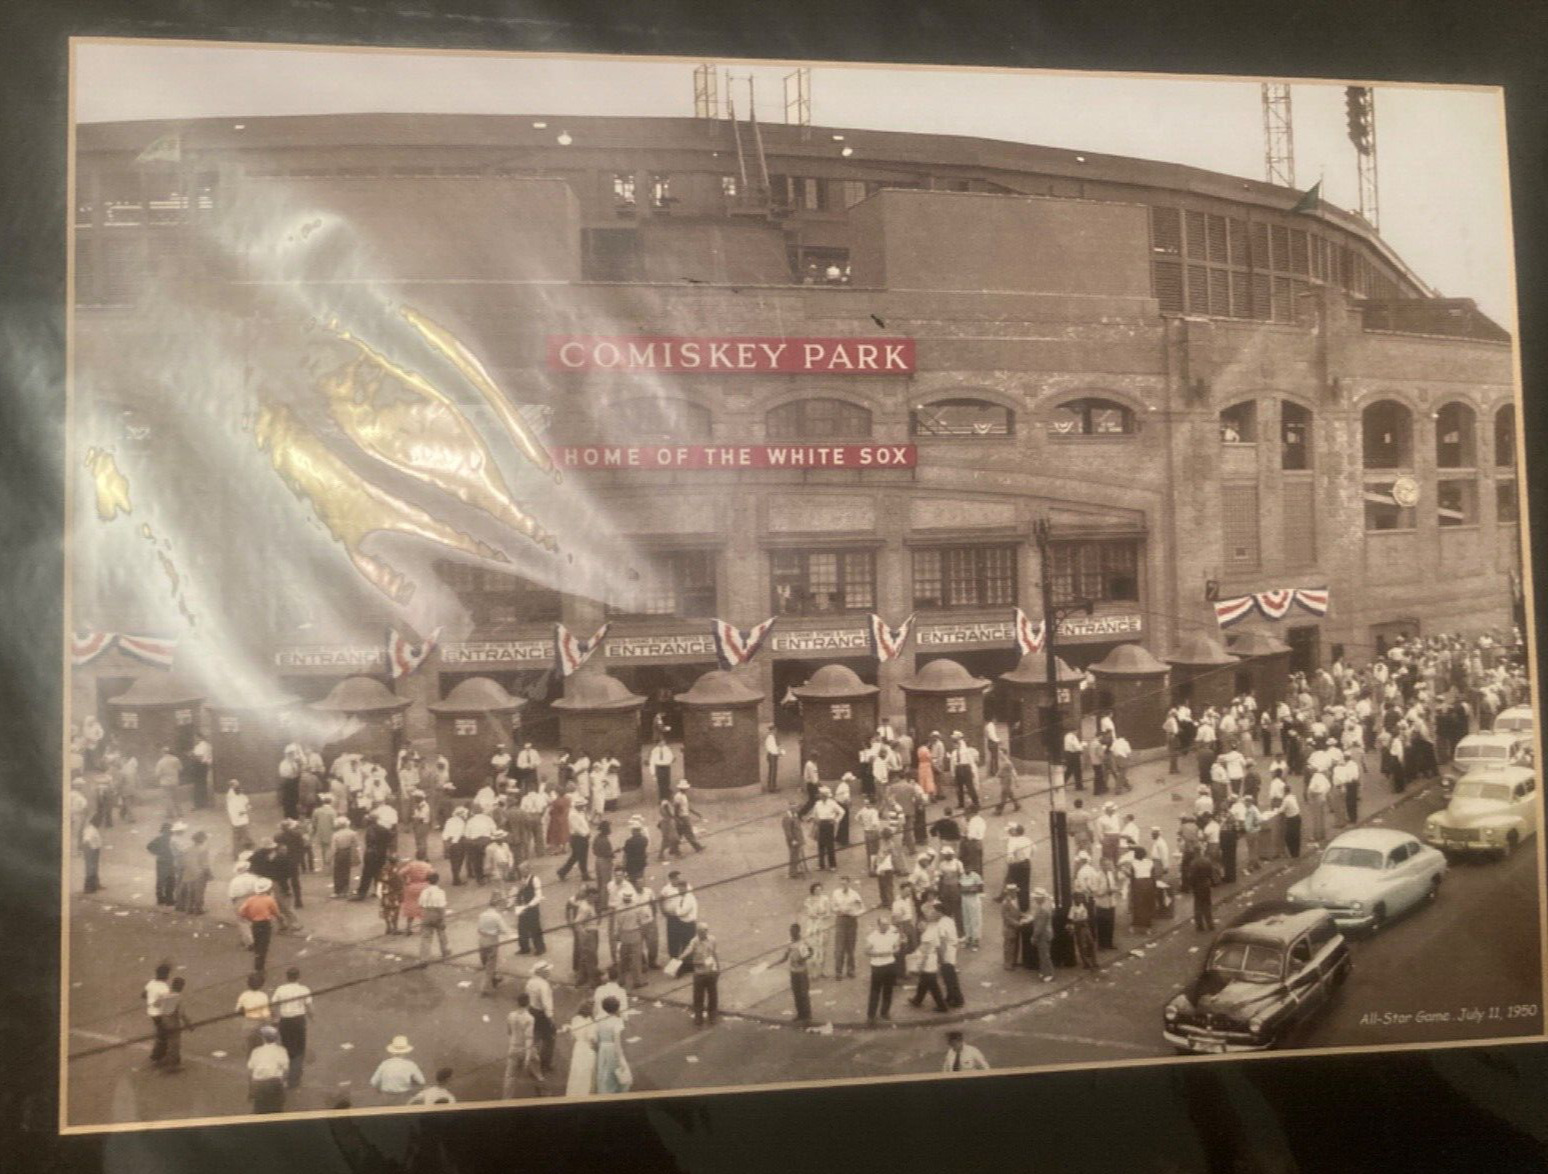 Comiskey Park 1950 (All-Star Game July 11)